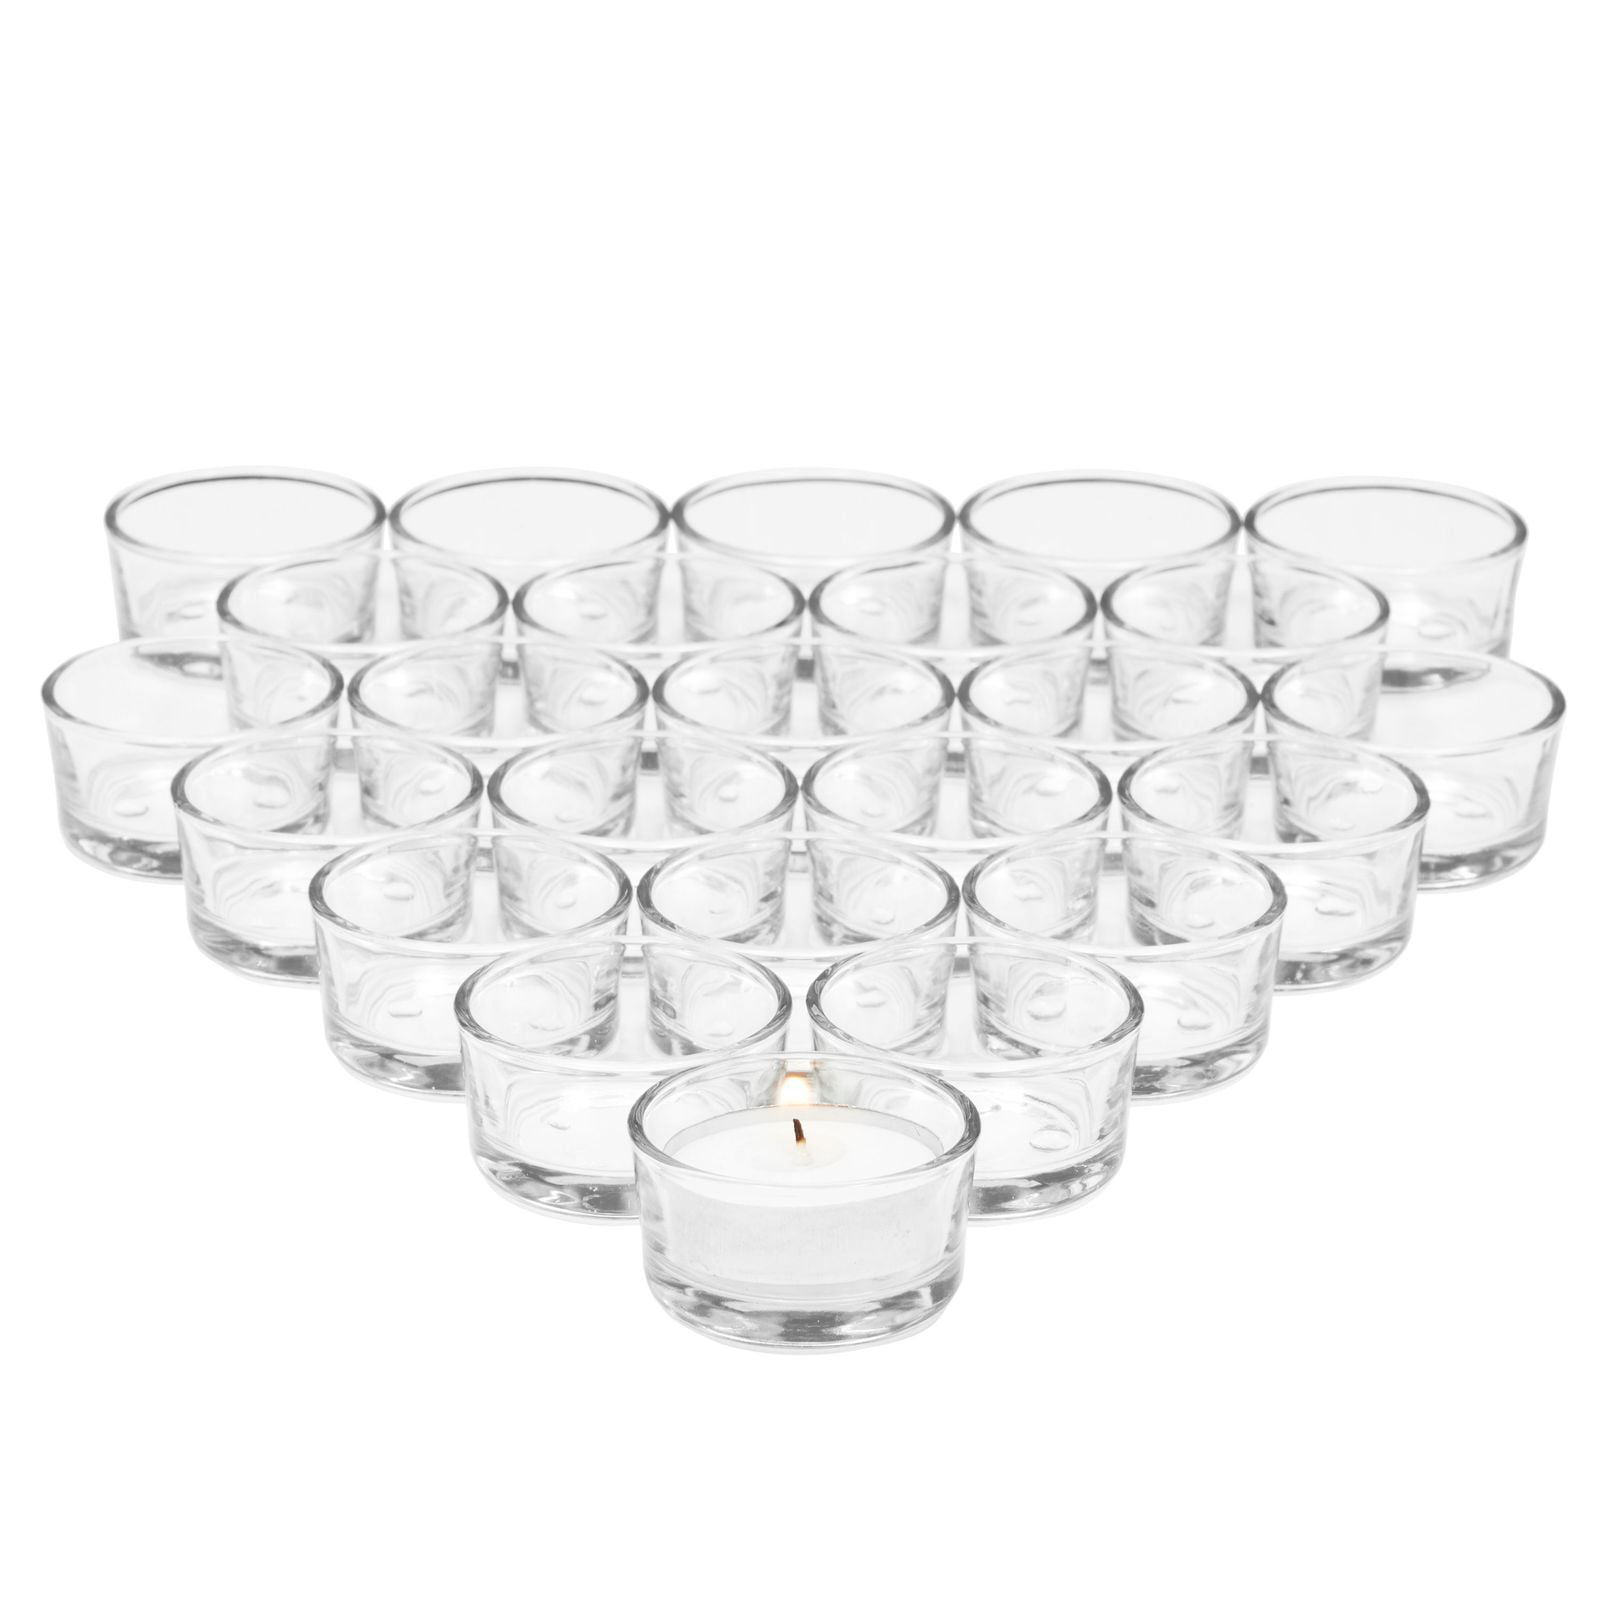 Just Artifacts Diamond Clear Glass Tealight Candle Holder 1-Inch Glass Tealight Candle Holders for Weddings and Home Décor 